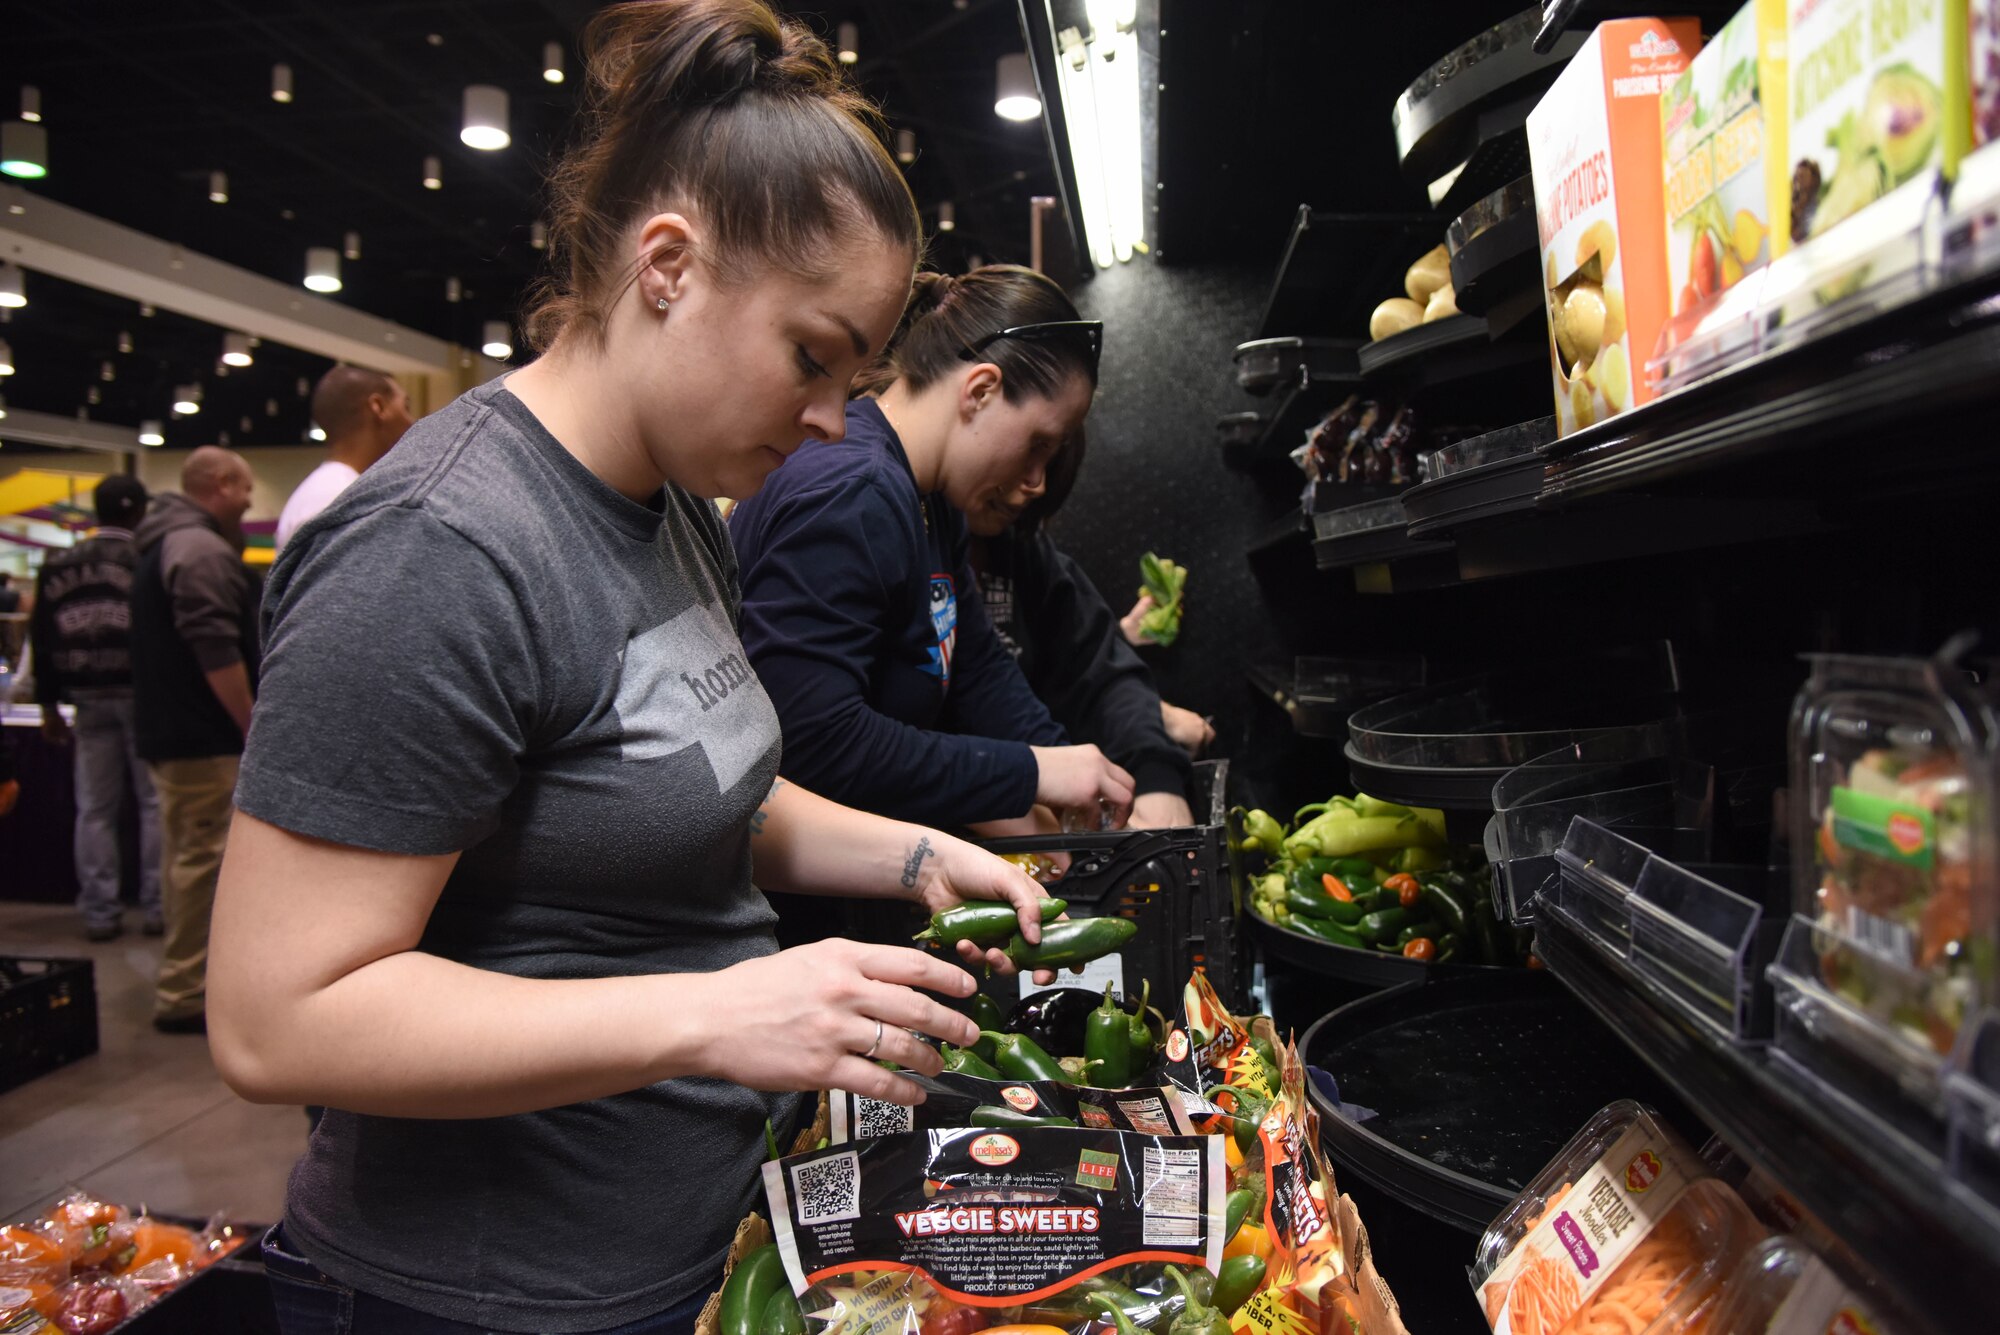 Tech. Sgt. Brittany Tyo, Mathies NCO Academy student, packages food items during a food drive at the Mississippi Coast Coliseum and Convention Center Jan. 16, 2018, Biloxi, Mississippi. More than 80 Airmen participated in the wing-level community sponsored volunteer event packaging over 21,000 pounds of food, equating to approximately 17,500 meals that will be provided to hunger relief. (U.S. Air Force photo by Kemberly Groue)